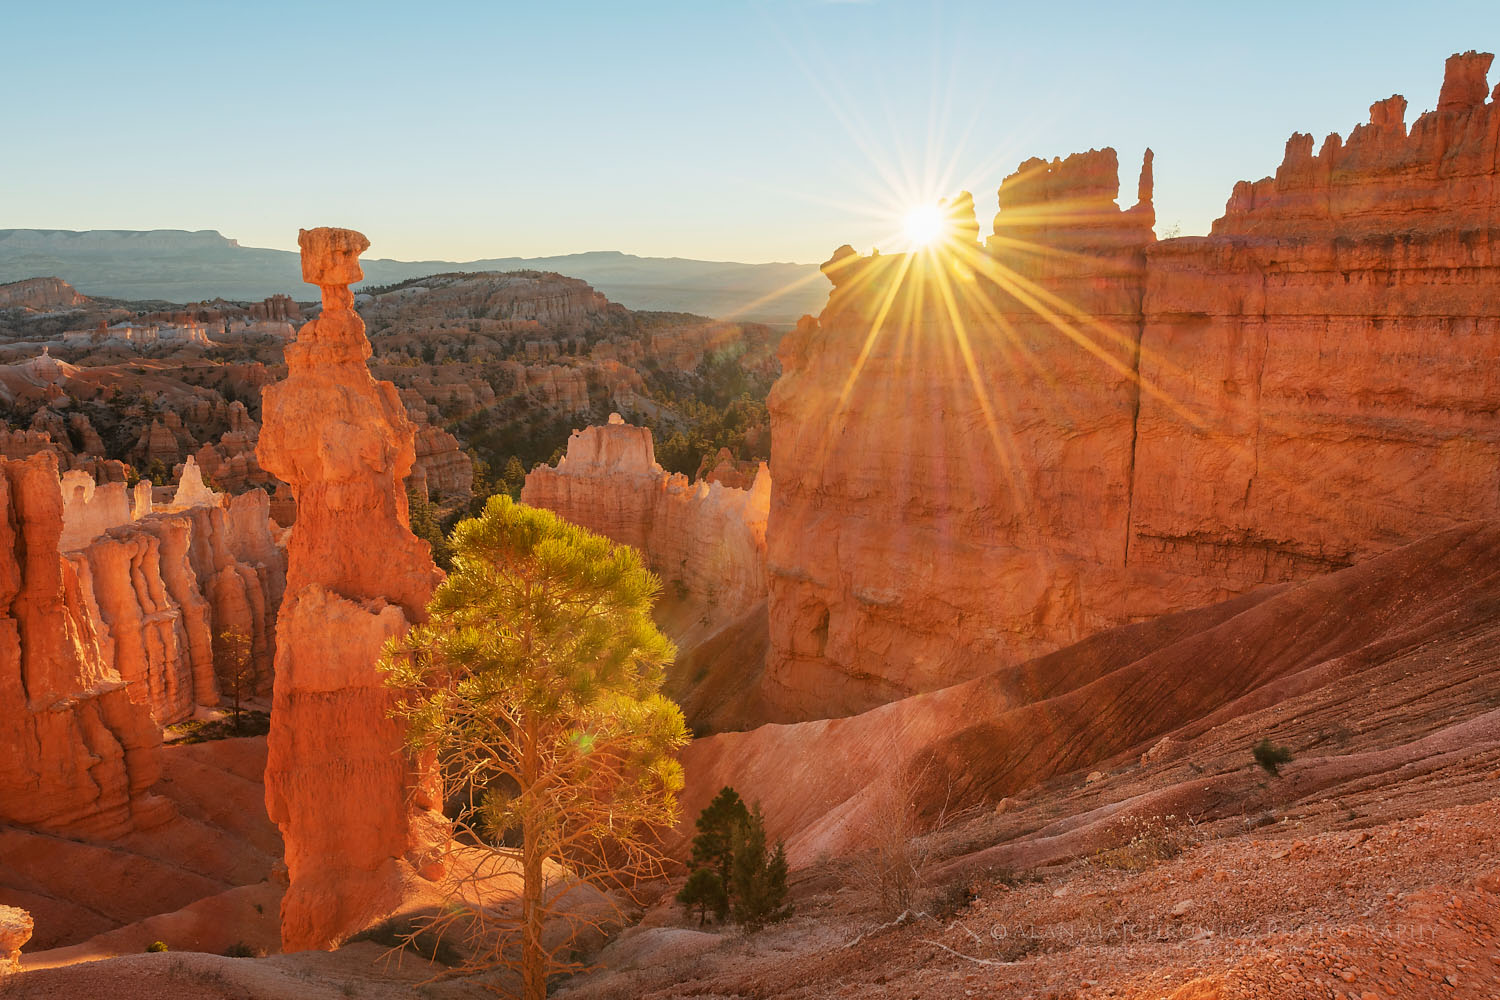 Sunrise view of Thor's Hammer and colorful hoodoos seen from below the canyon rim at Sunrise Point, Bryce Canyon National Park, Utah